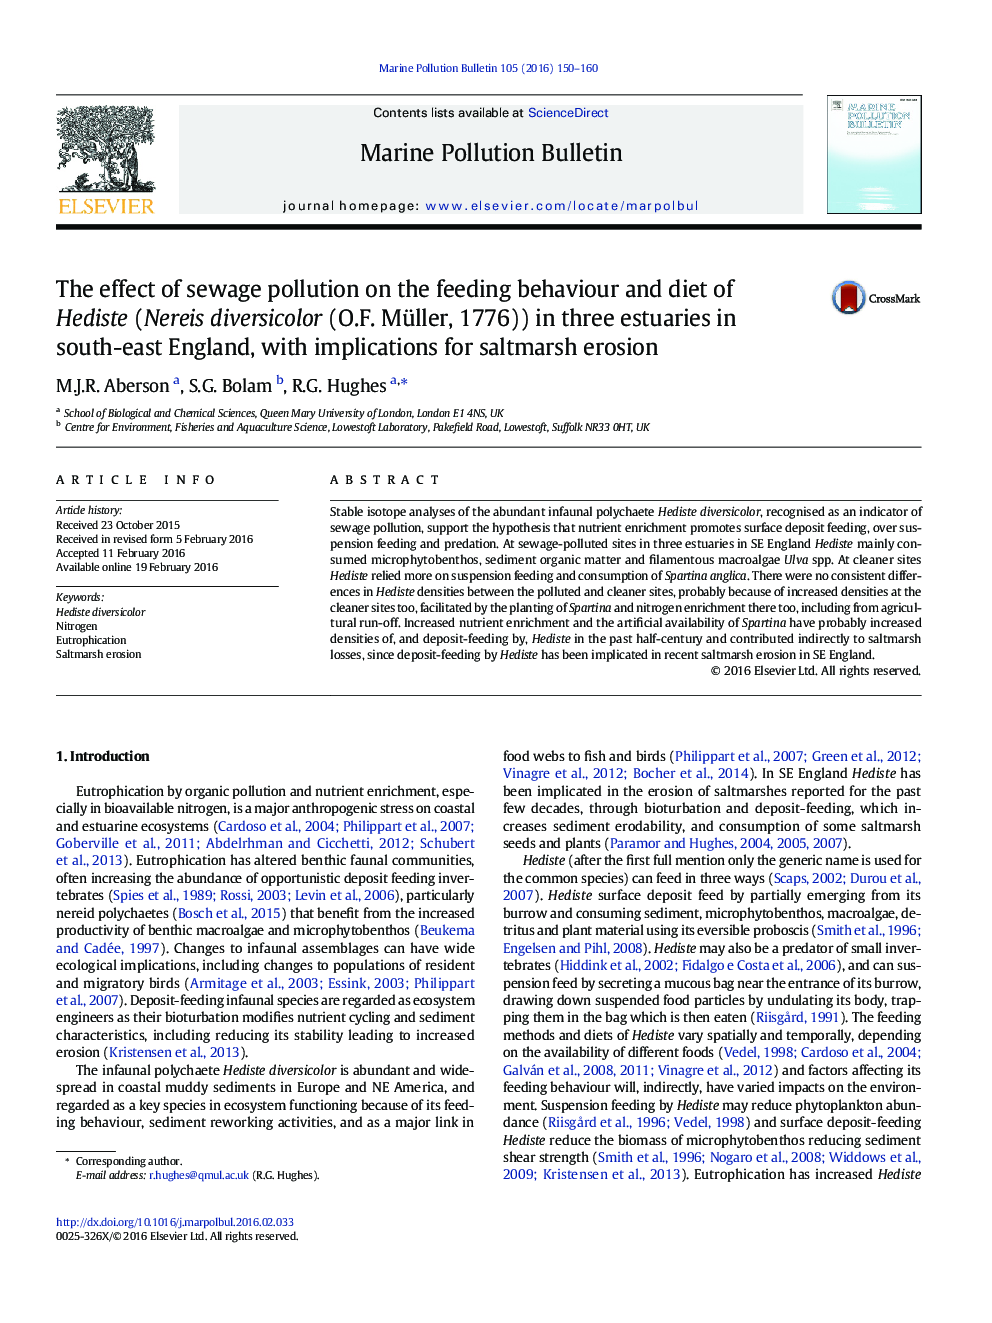 The effect of sewage pollution on the feeding behaviour and diet of Hediste (Nereis diversicolor (O.F. Müller, 1776)) in three estuaries in south-east England, with implications for saltmarsh erosion